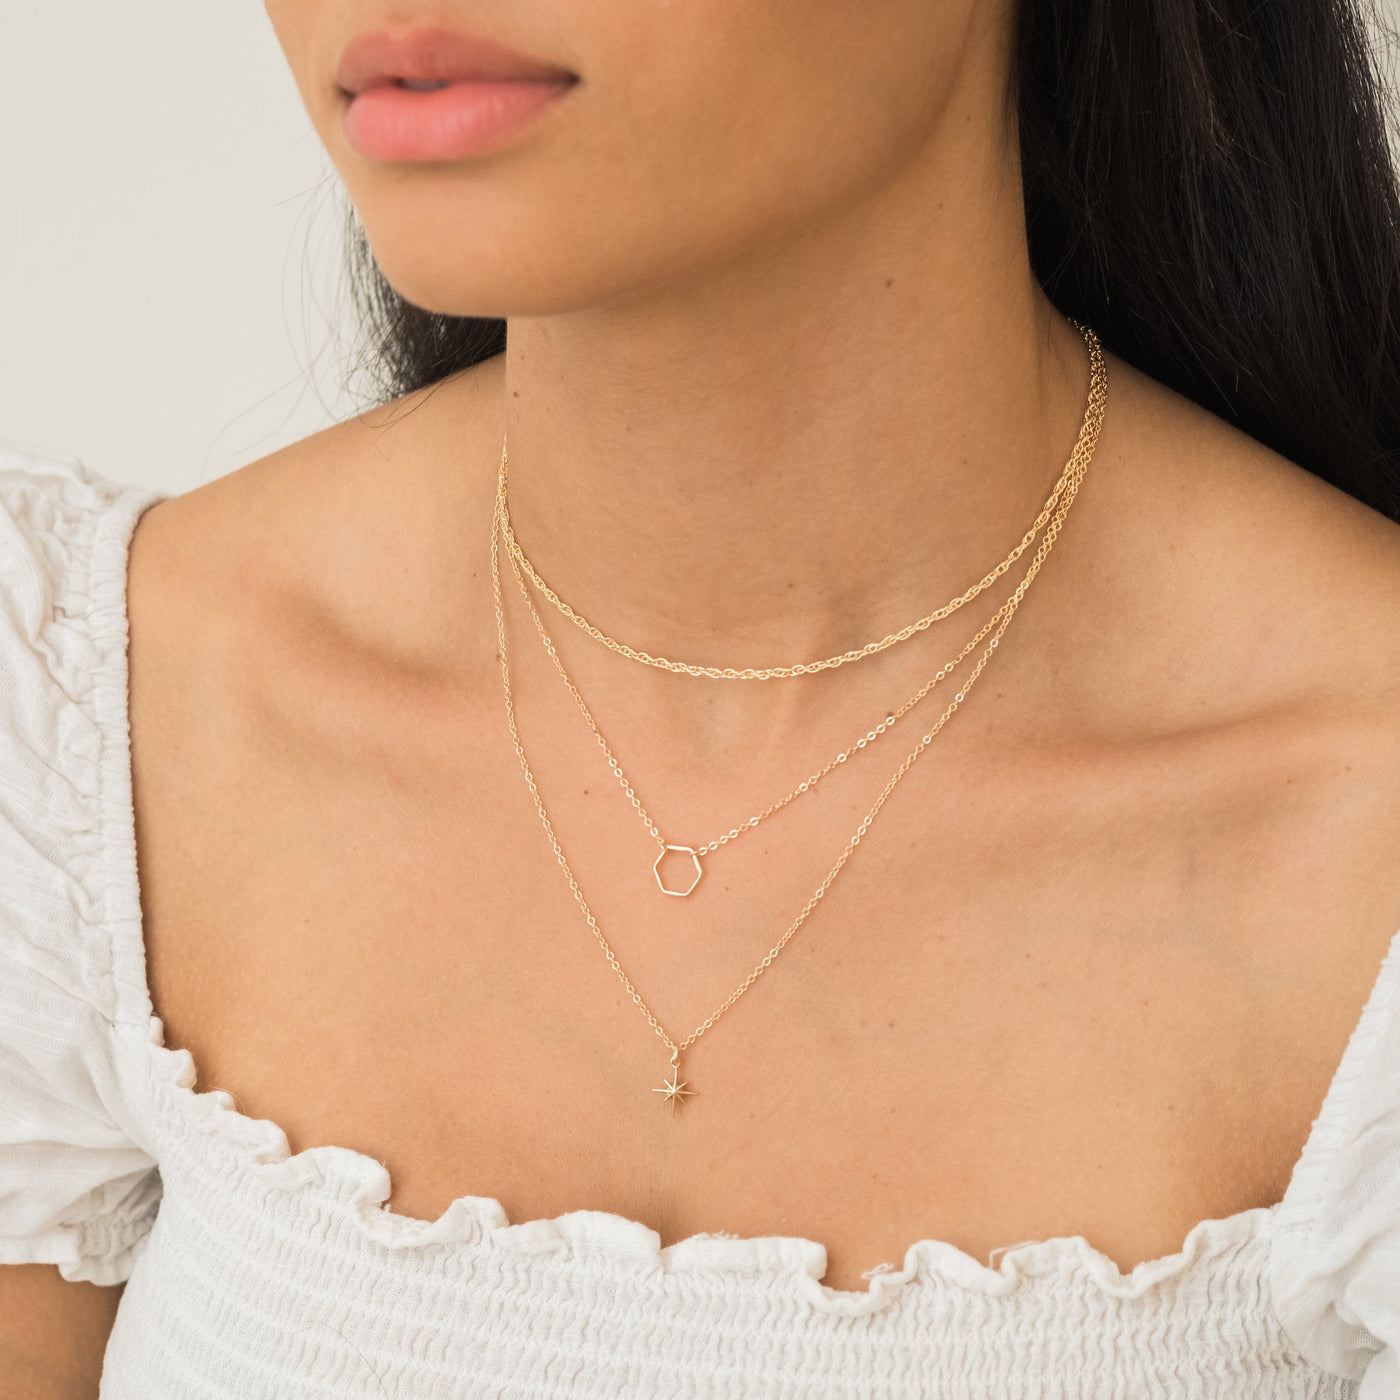 North Star Necklace | Simple & Dainty Jewelry